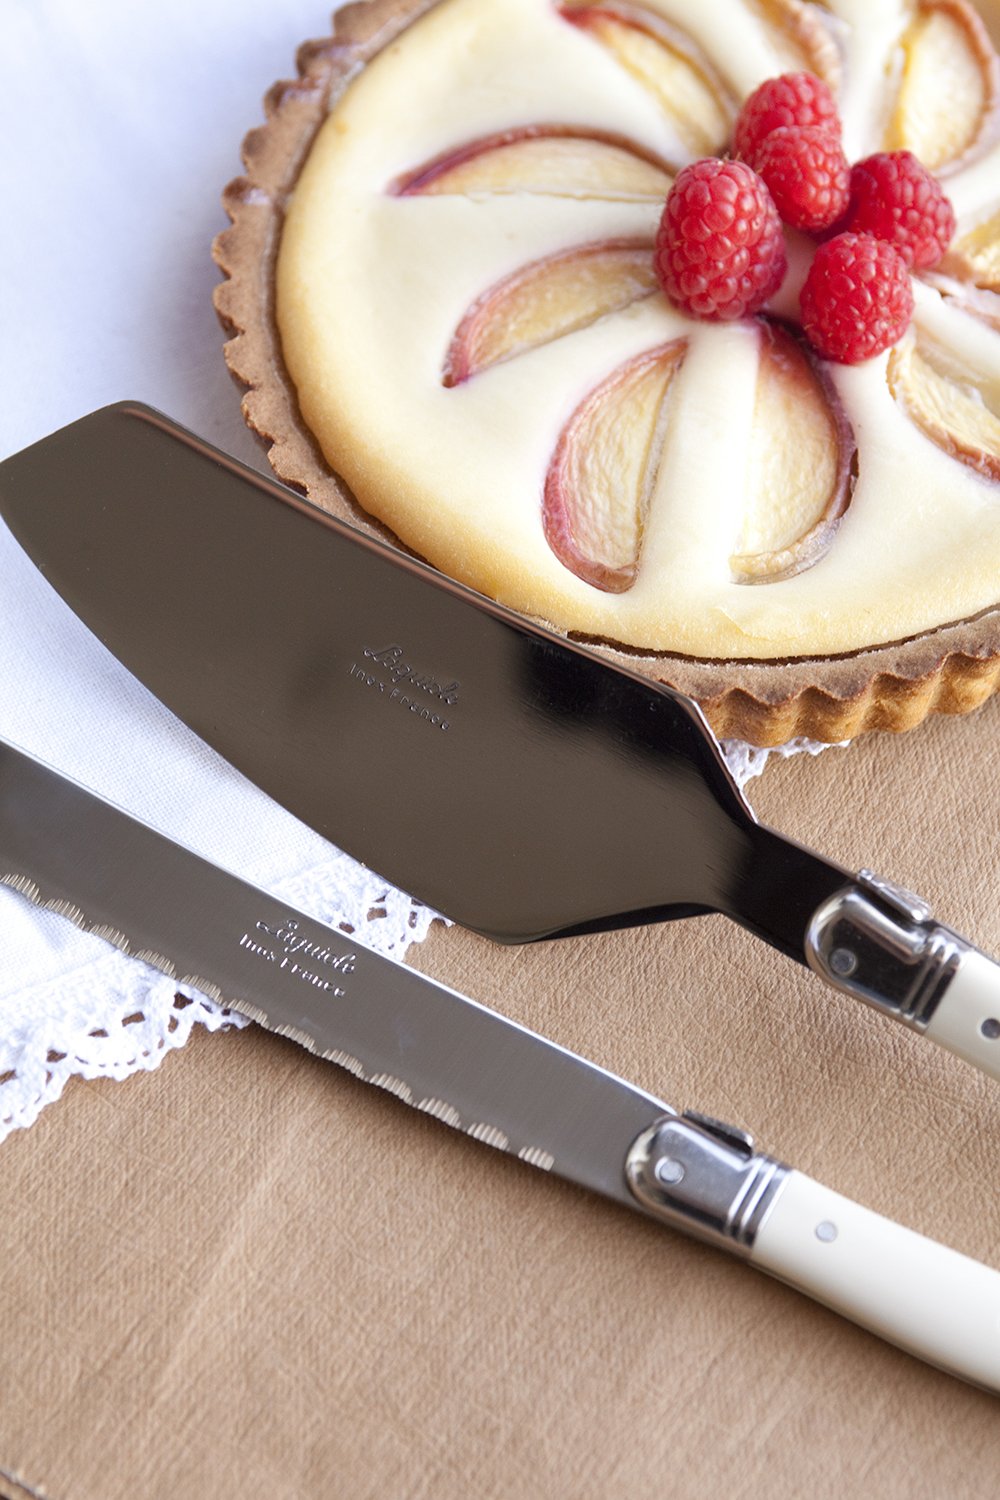 Laguiole Ivory Cake Set in Wood Box (Cake Slicer and Bread Knife) - French Dry Goods